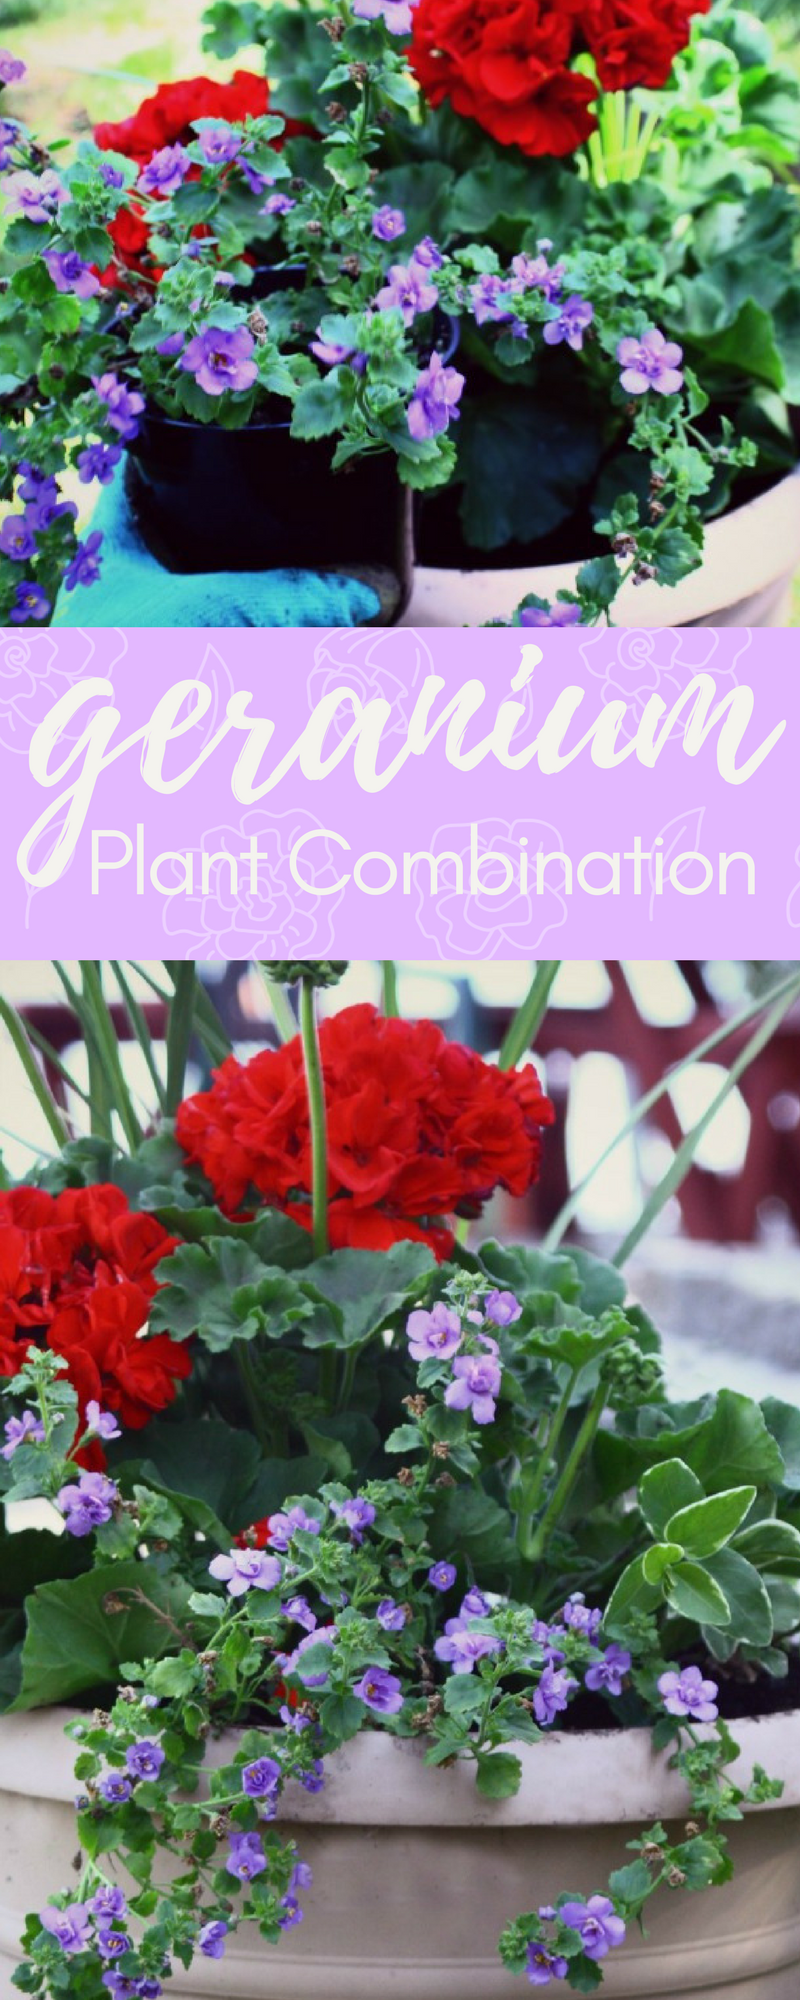 The easiest plant combination featuring Geraniums, a great sturdy, vibrant summer flower. Very showy blooms that last all summer and into fall! #TheTwinCedars #geraniums #flowers #gardening #redandpurple